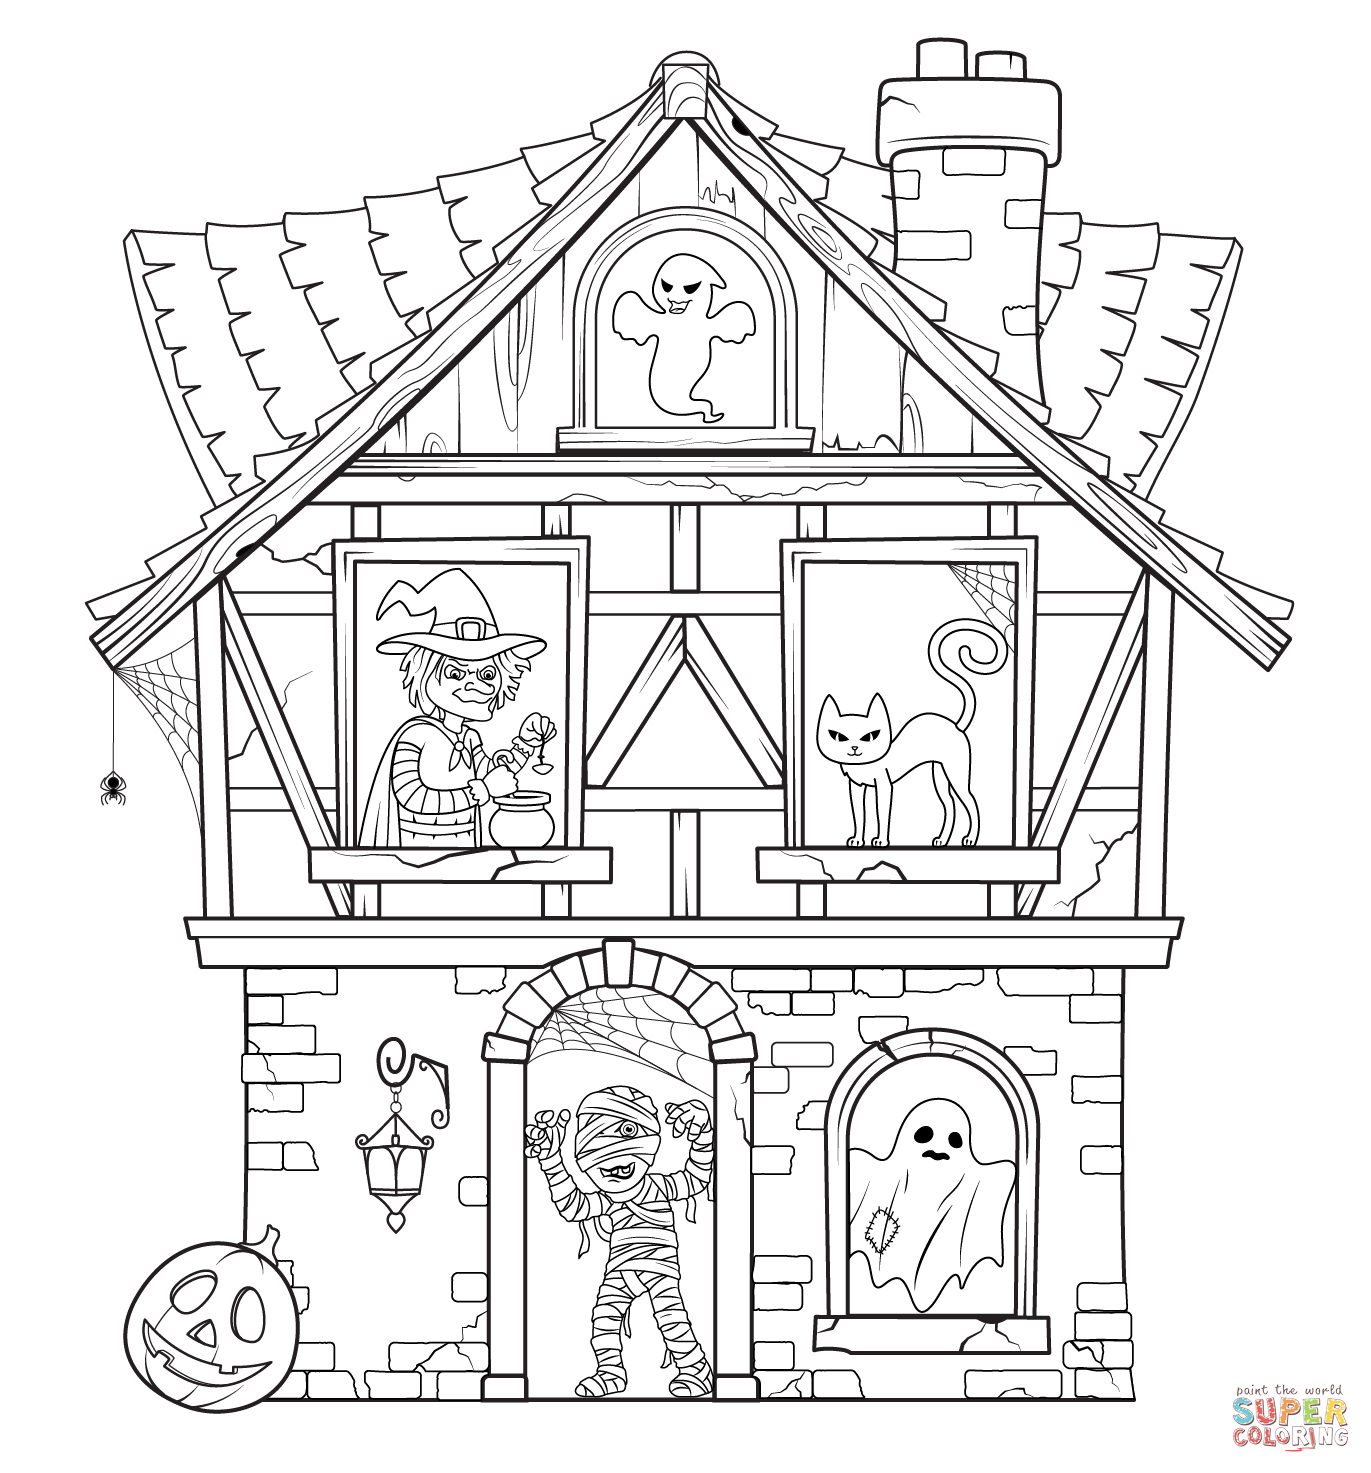 Haunted house with halloween characters coloring page free printable coloring pages